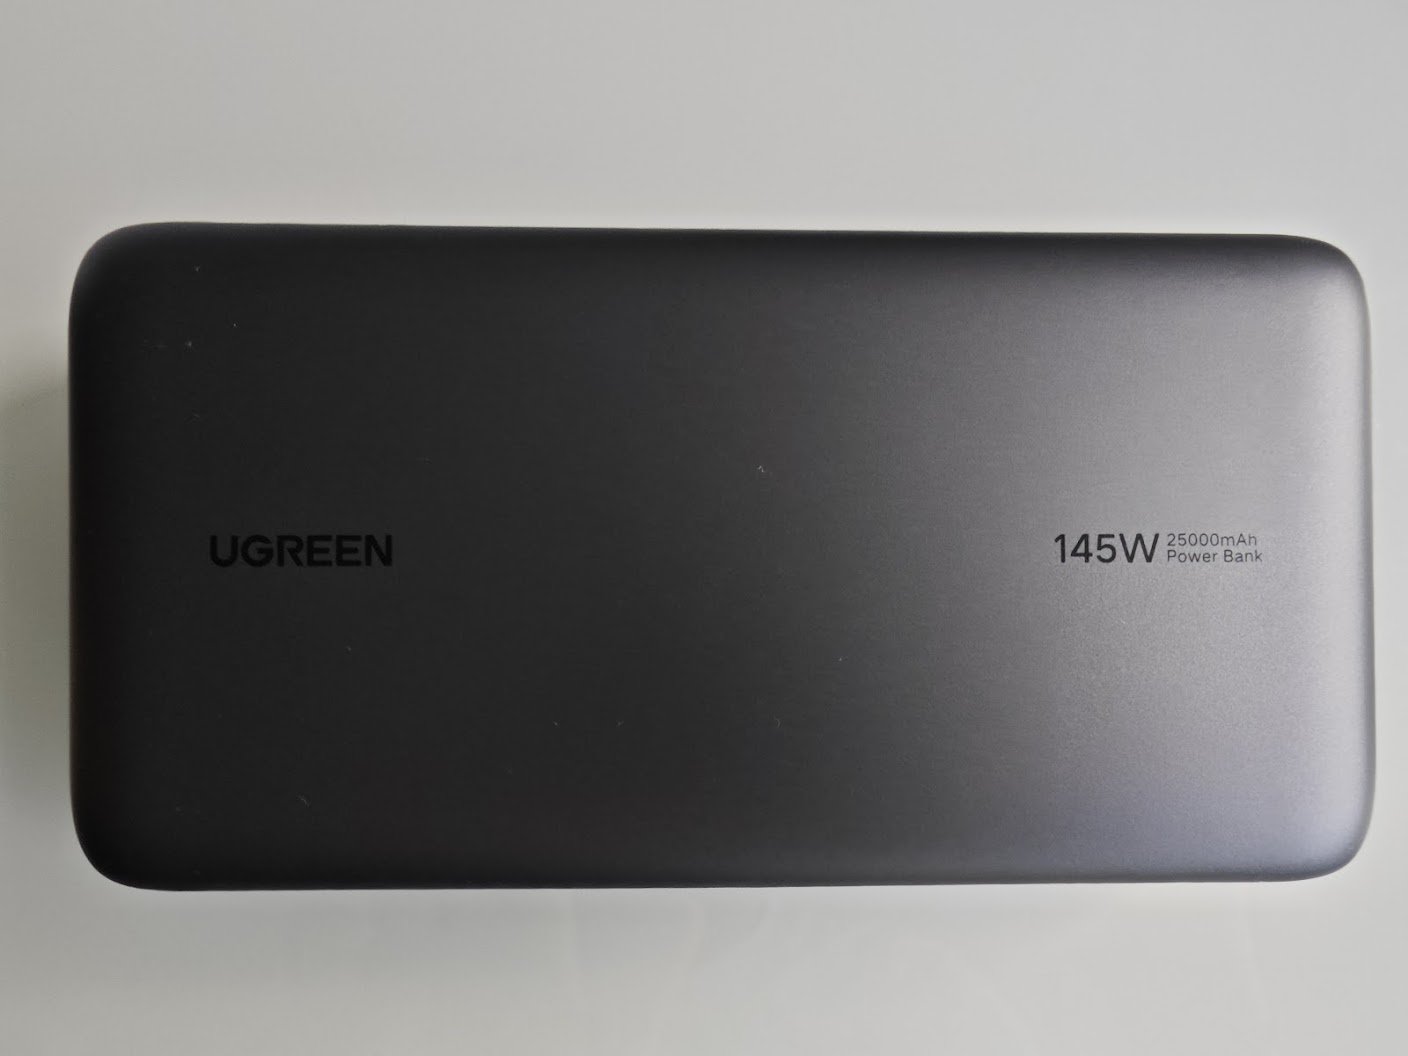 UGreen 145W power bank review: 25,000mAh juice for a MacBook and